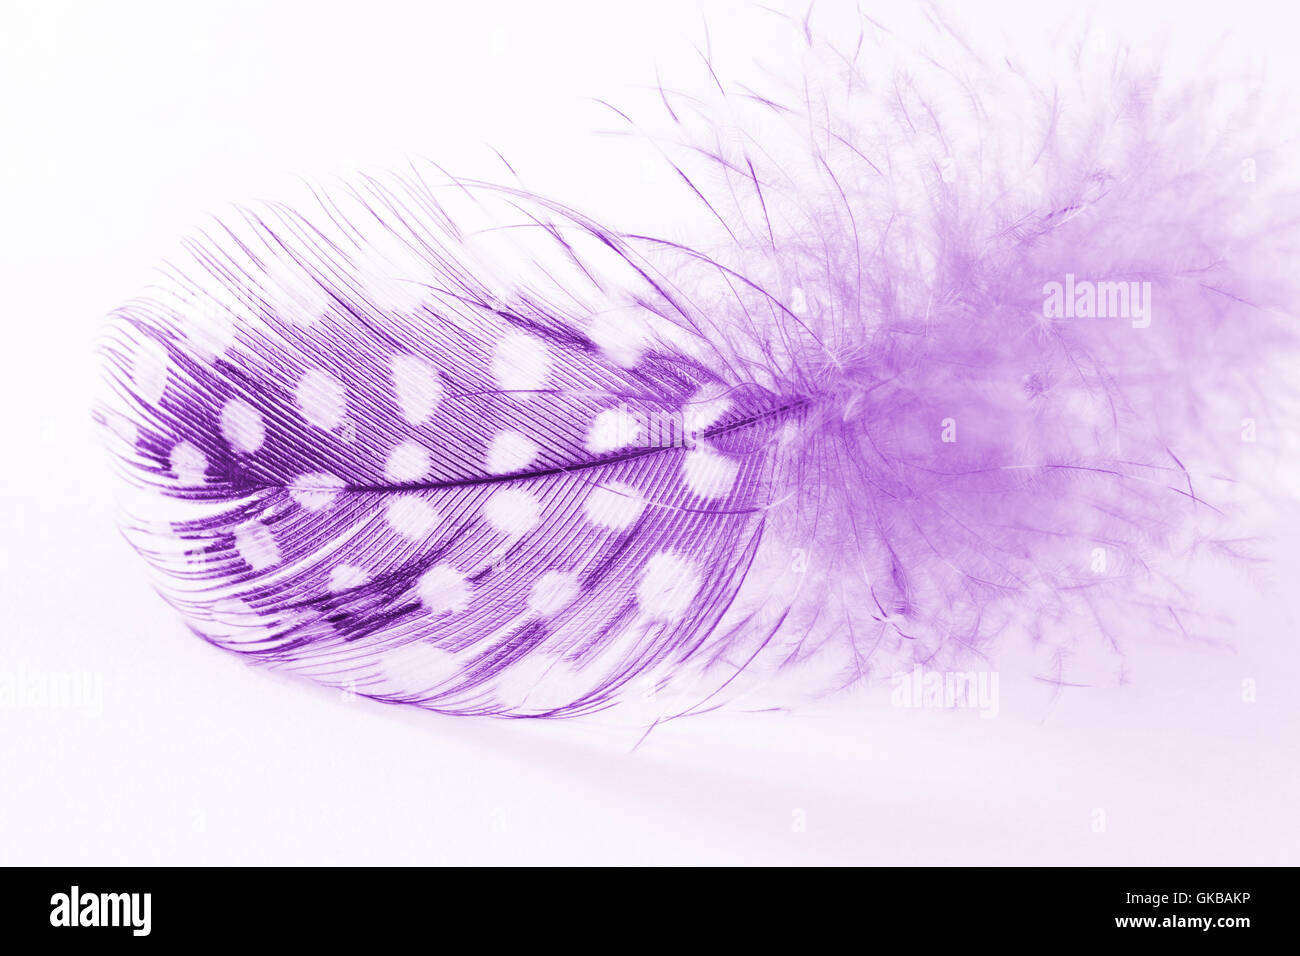 A purple and white spotted feather on a white background Stock Photo